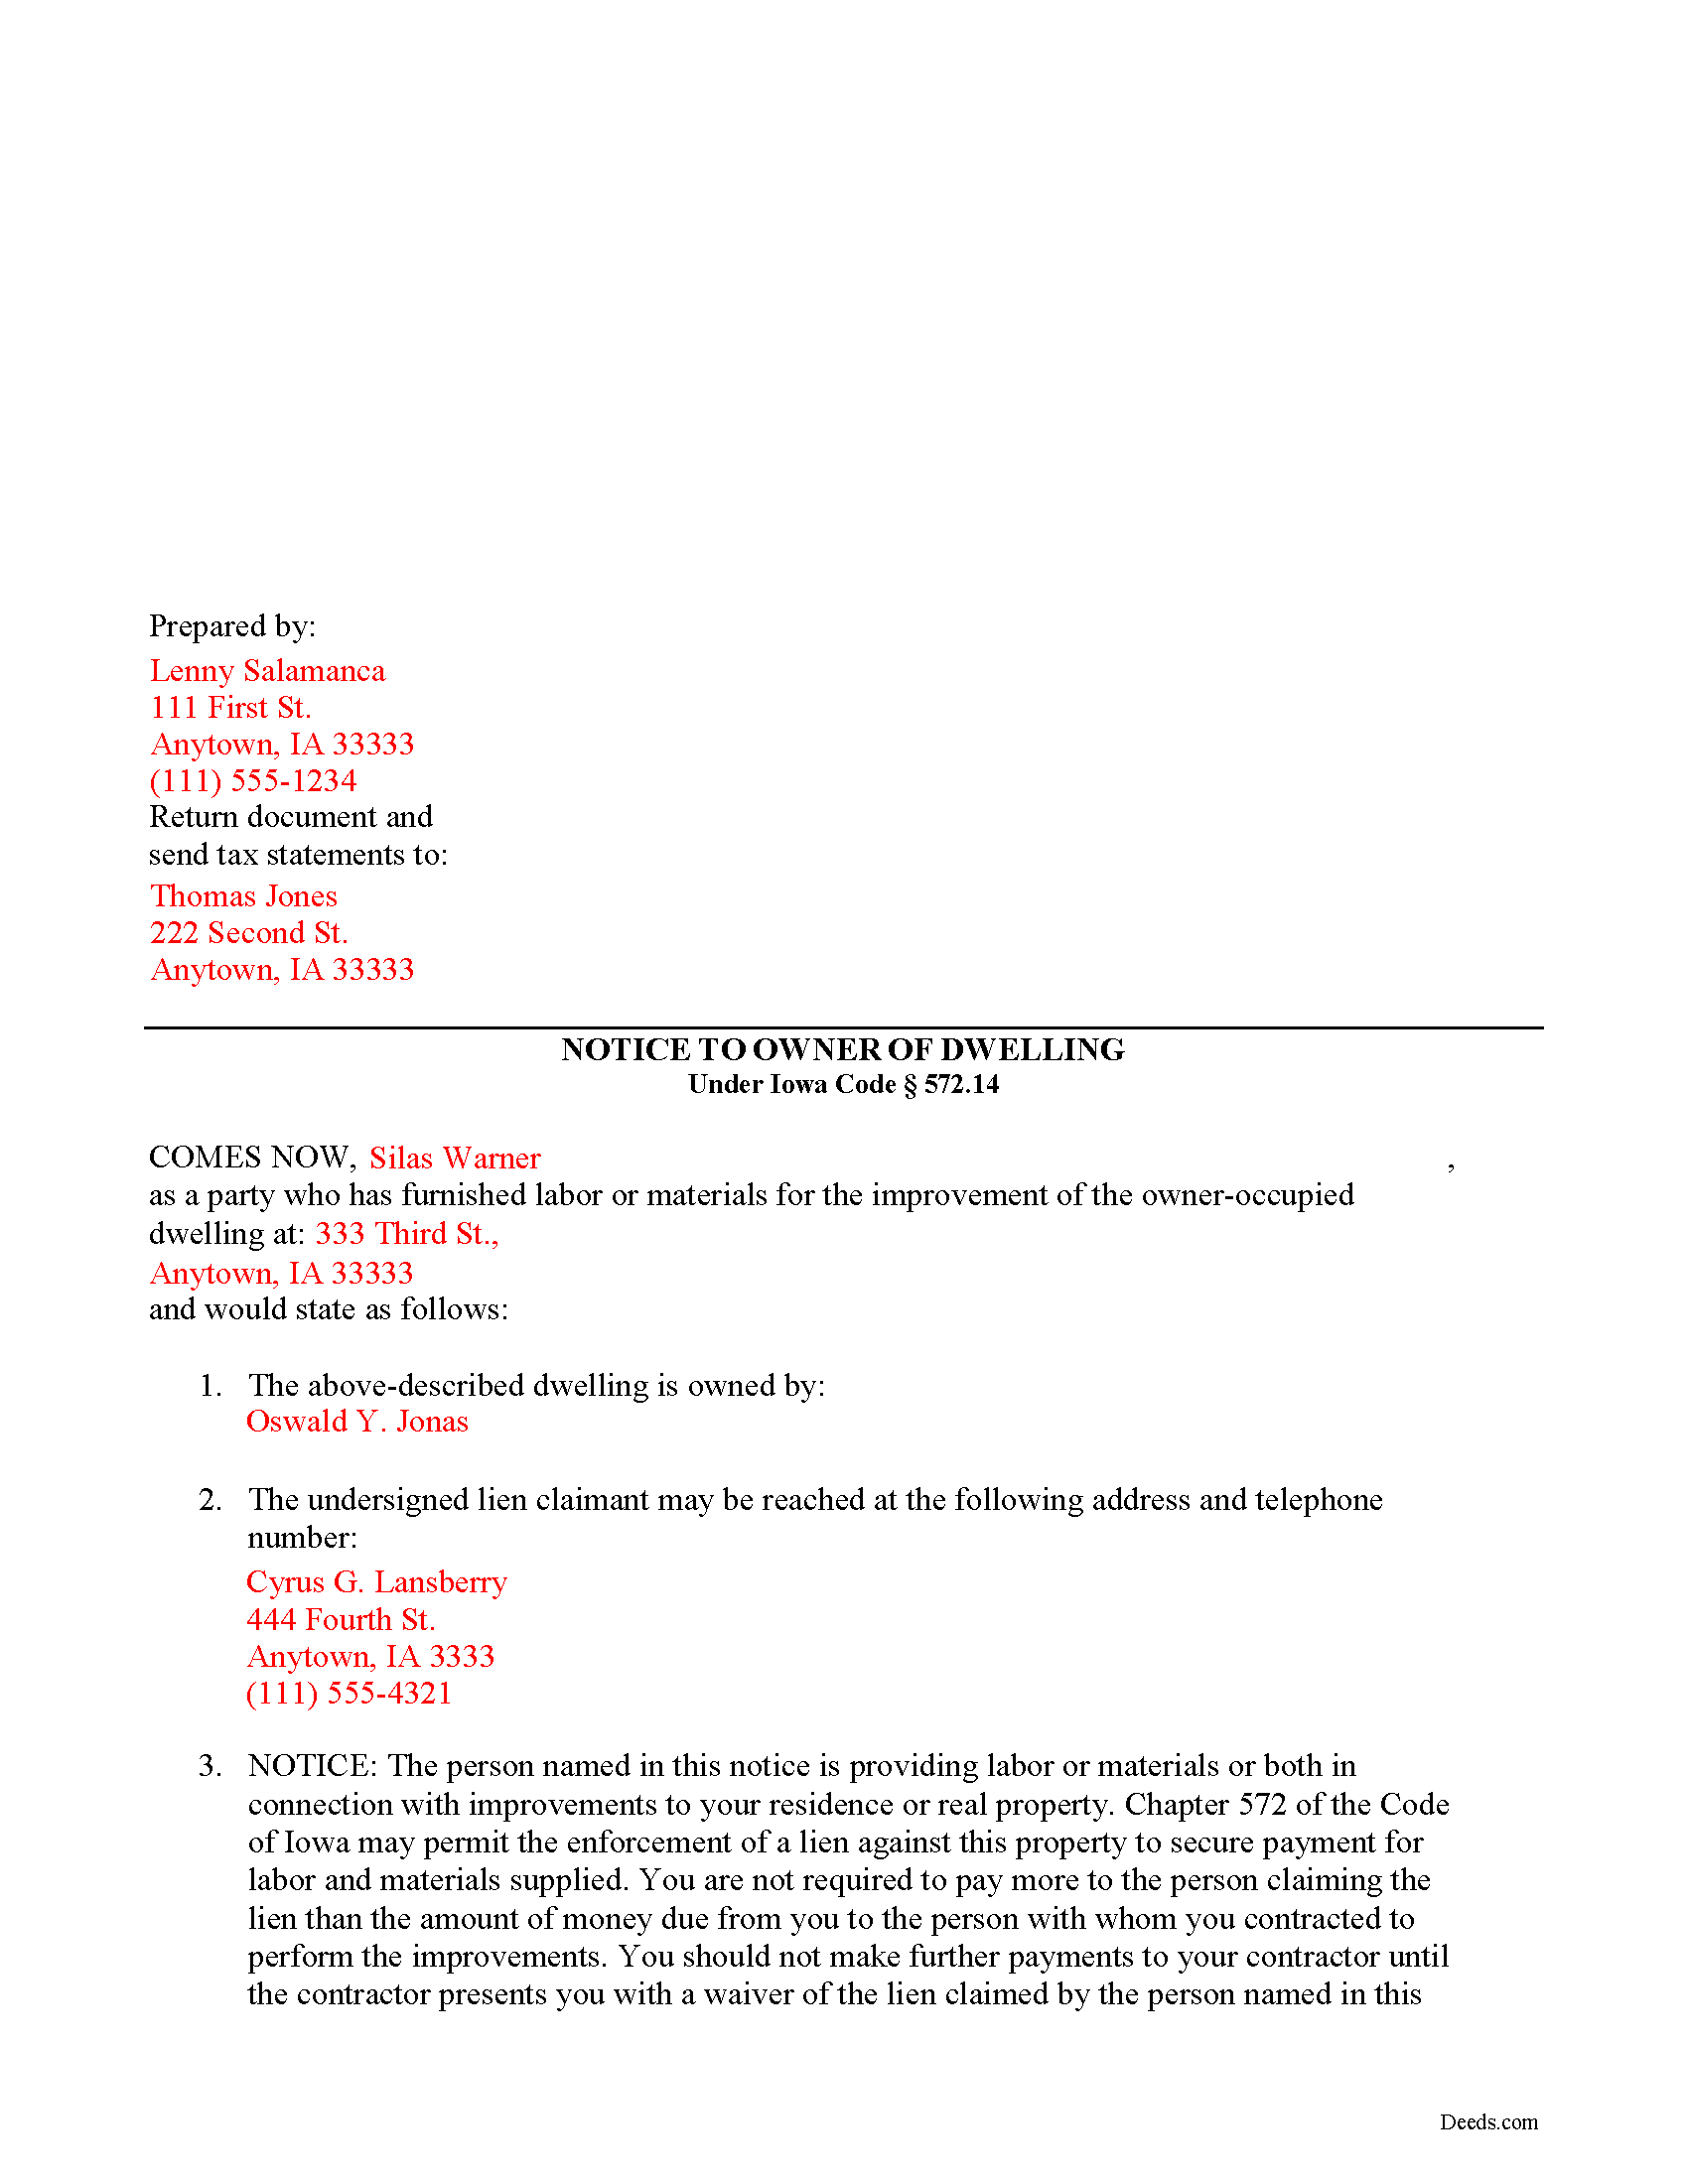 Completed Example of the Subcontractor Notice to Owner Document